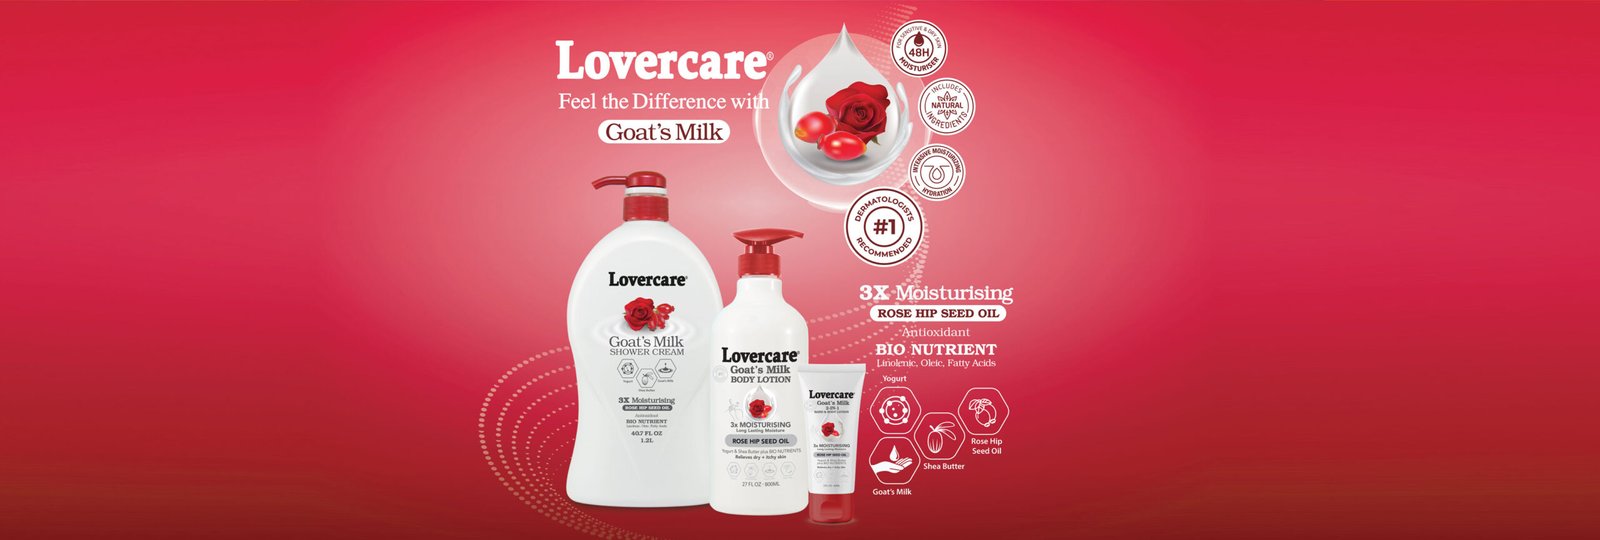 Lovercare body lotion